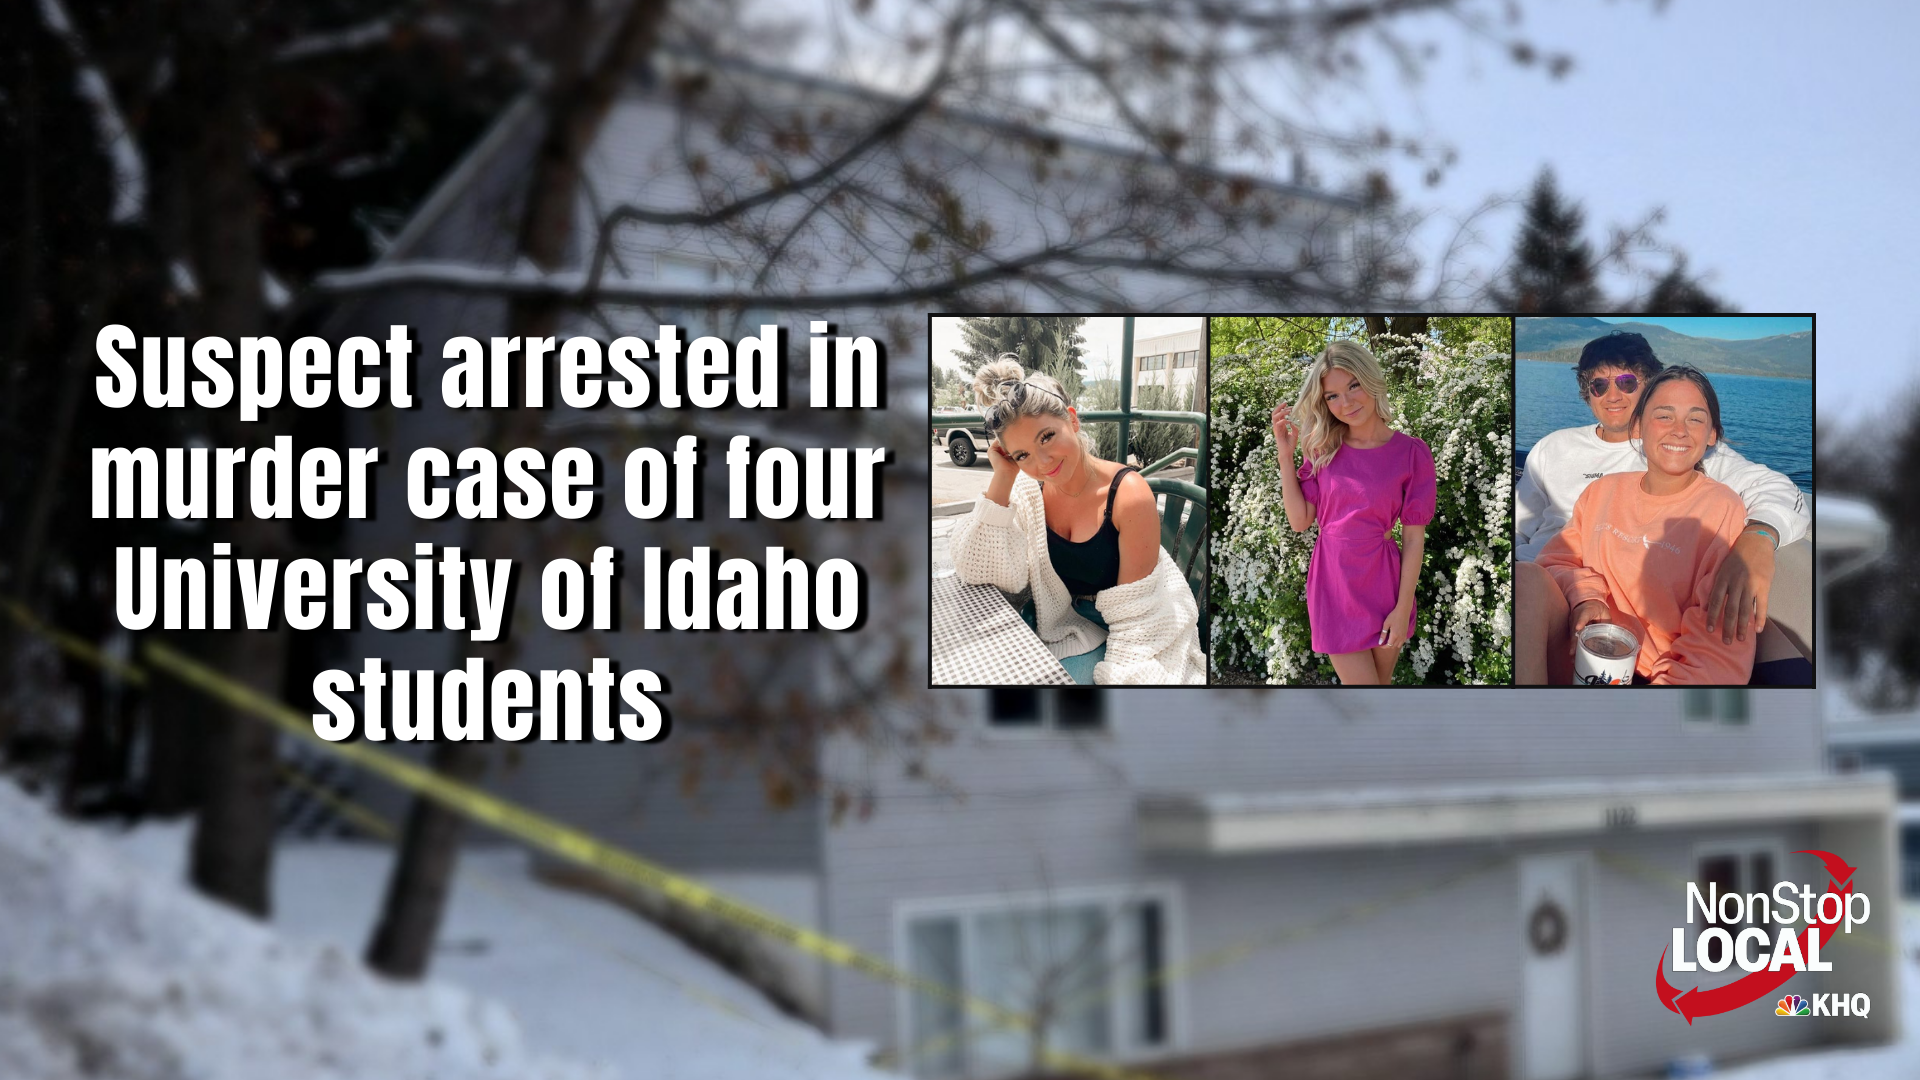 Families of Idaho murder victims hopeful for justice after suspect's arrest